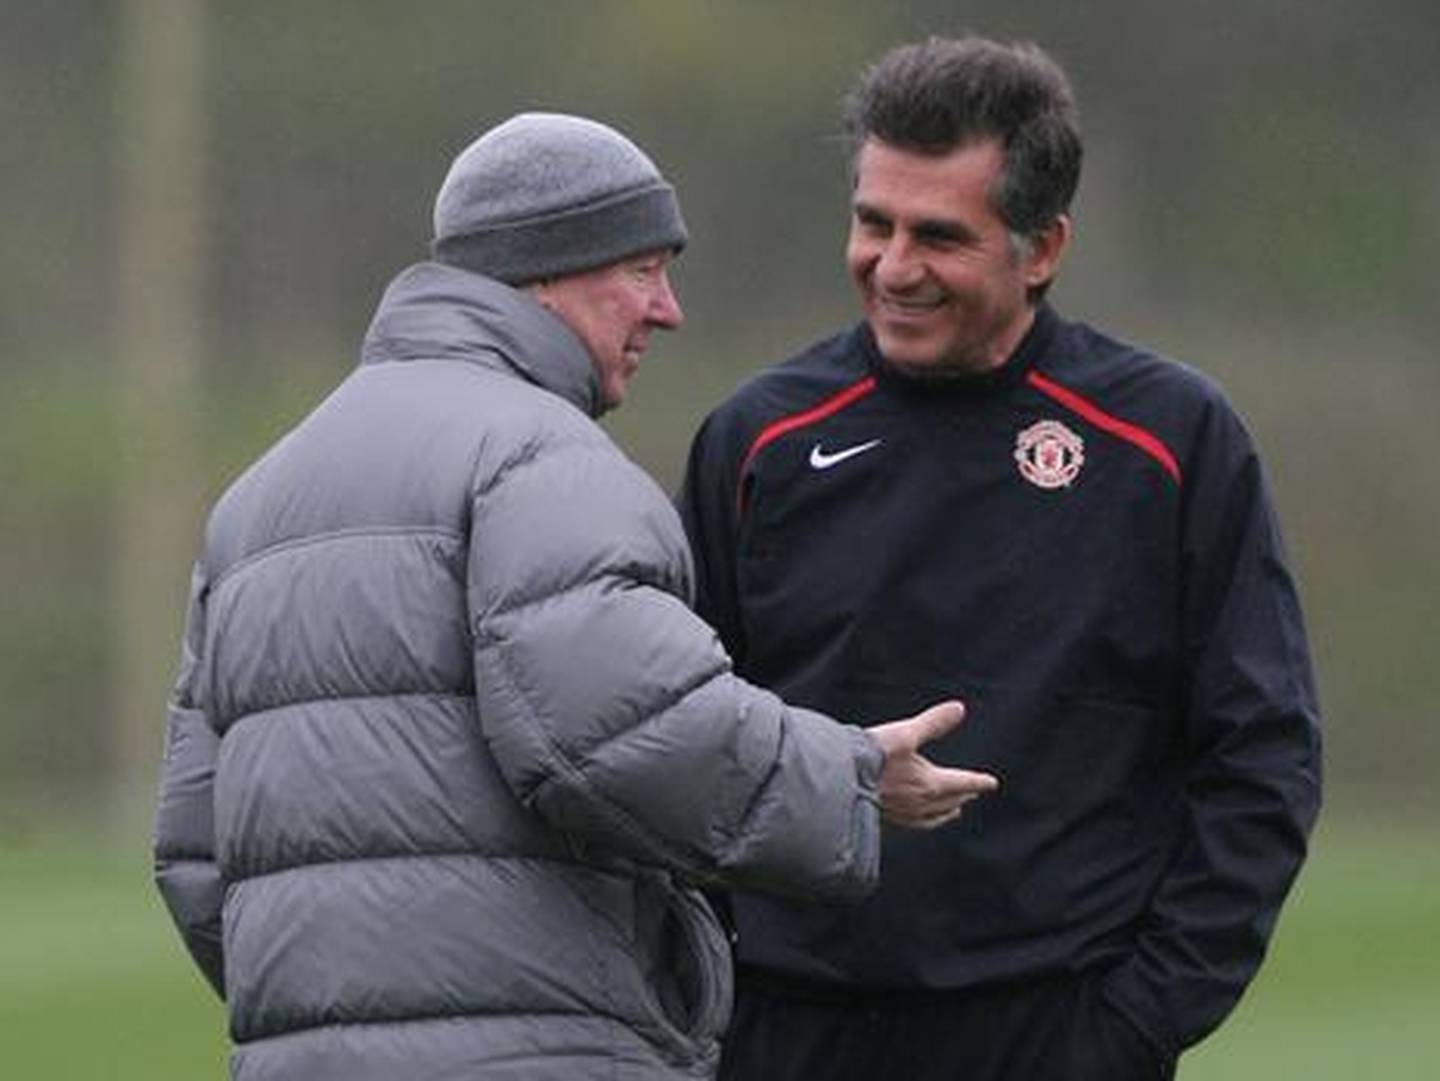 Former Manchester United manager Sir Alex Ferguson, left, worked with Carlos Queiroz. AP